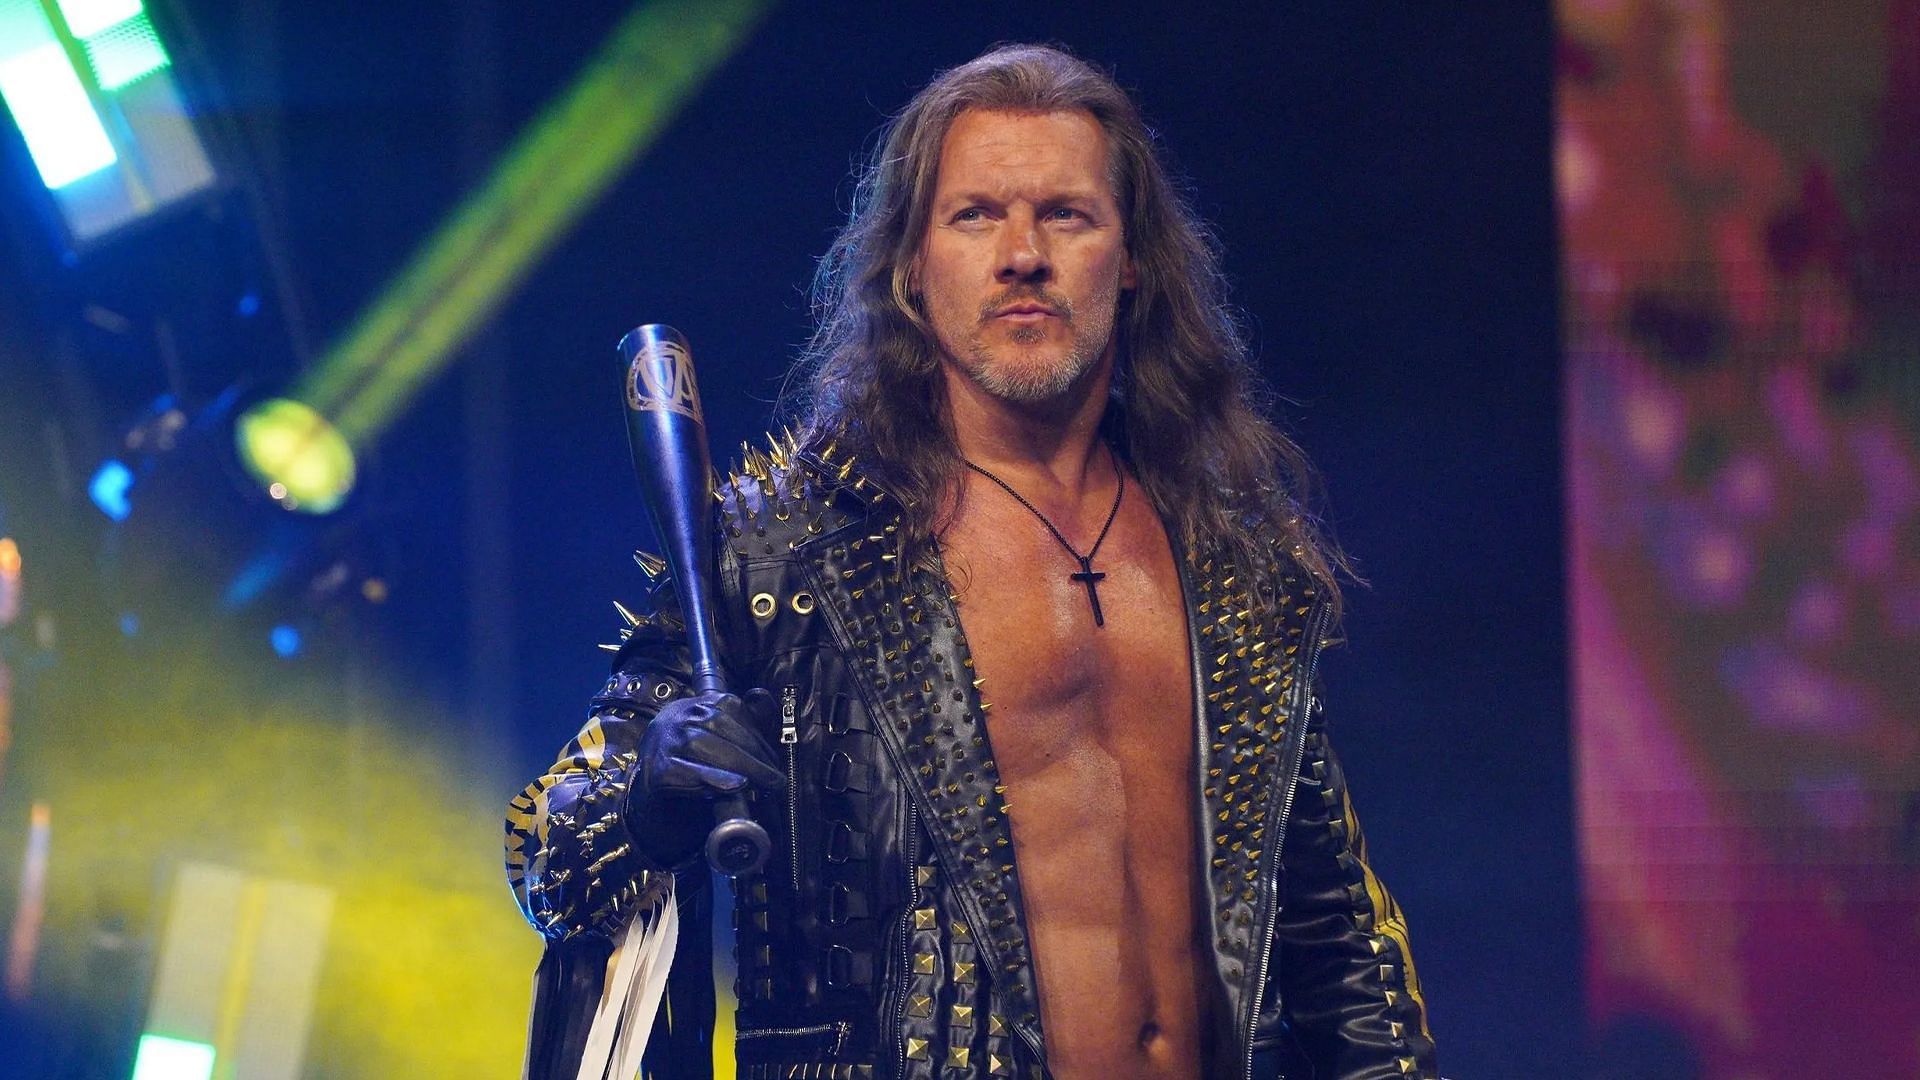 Jericho is a former AEW World Champion